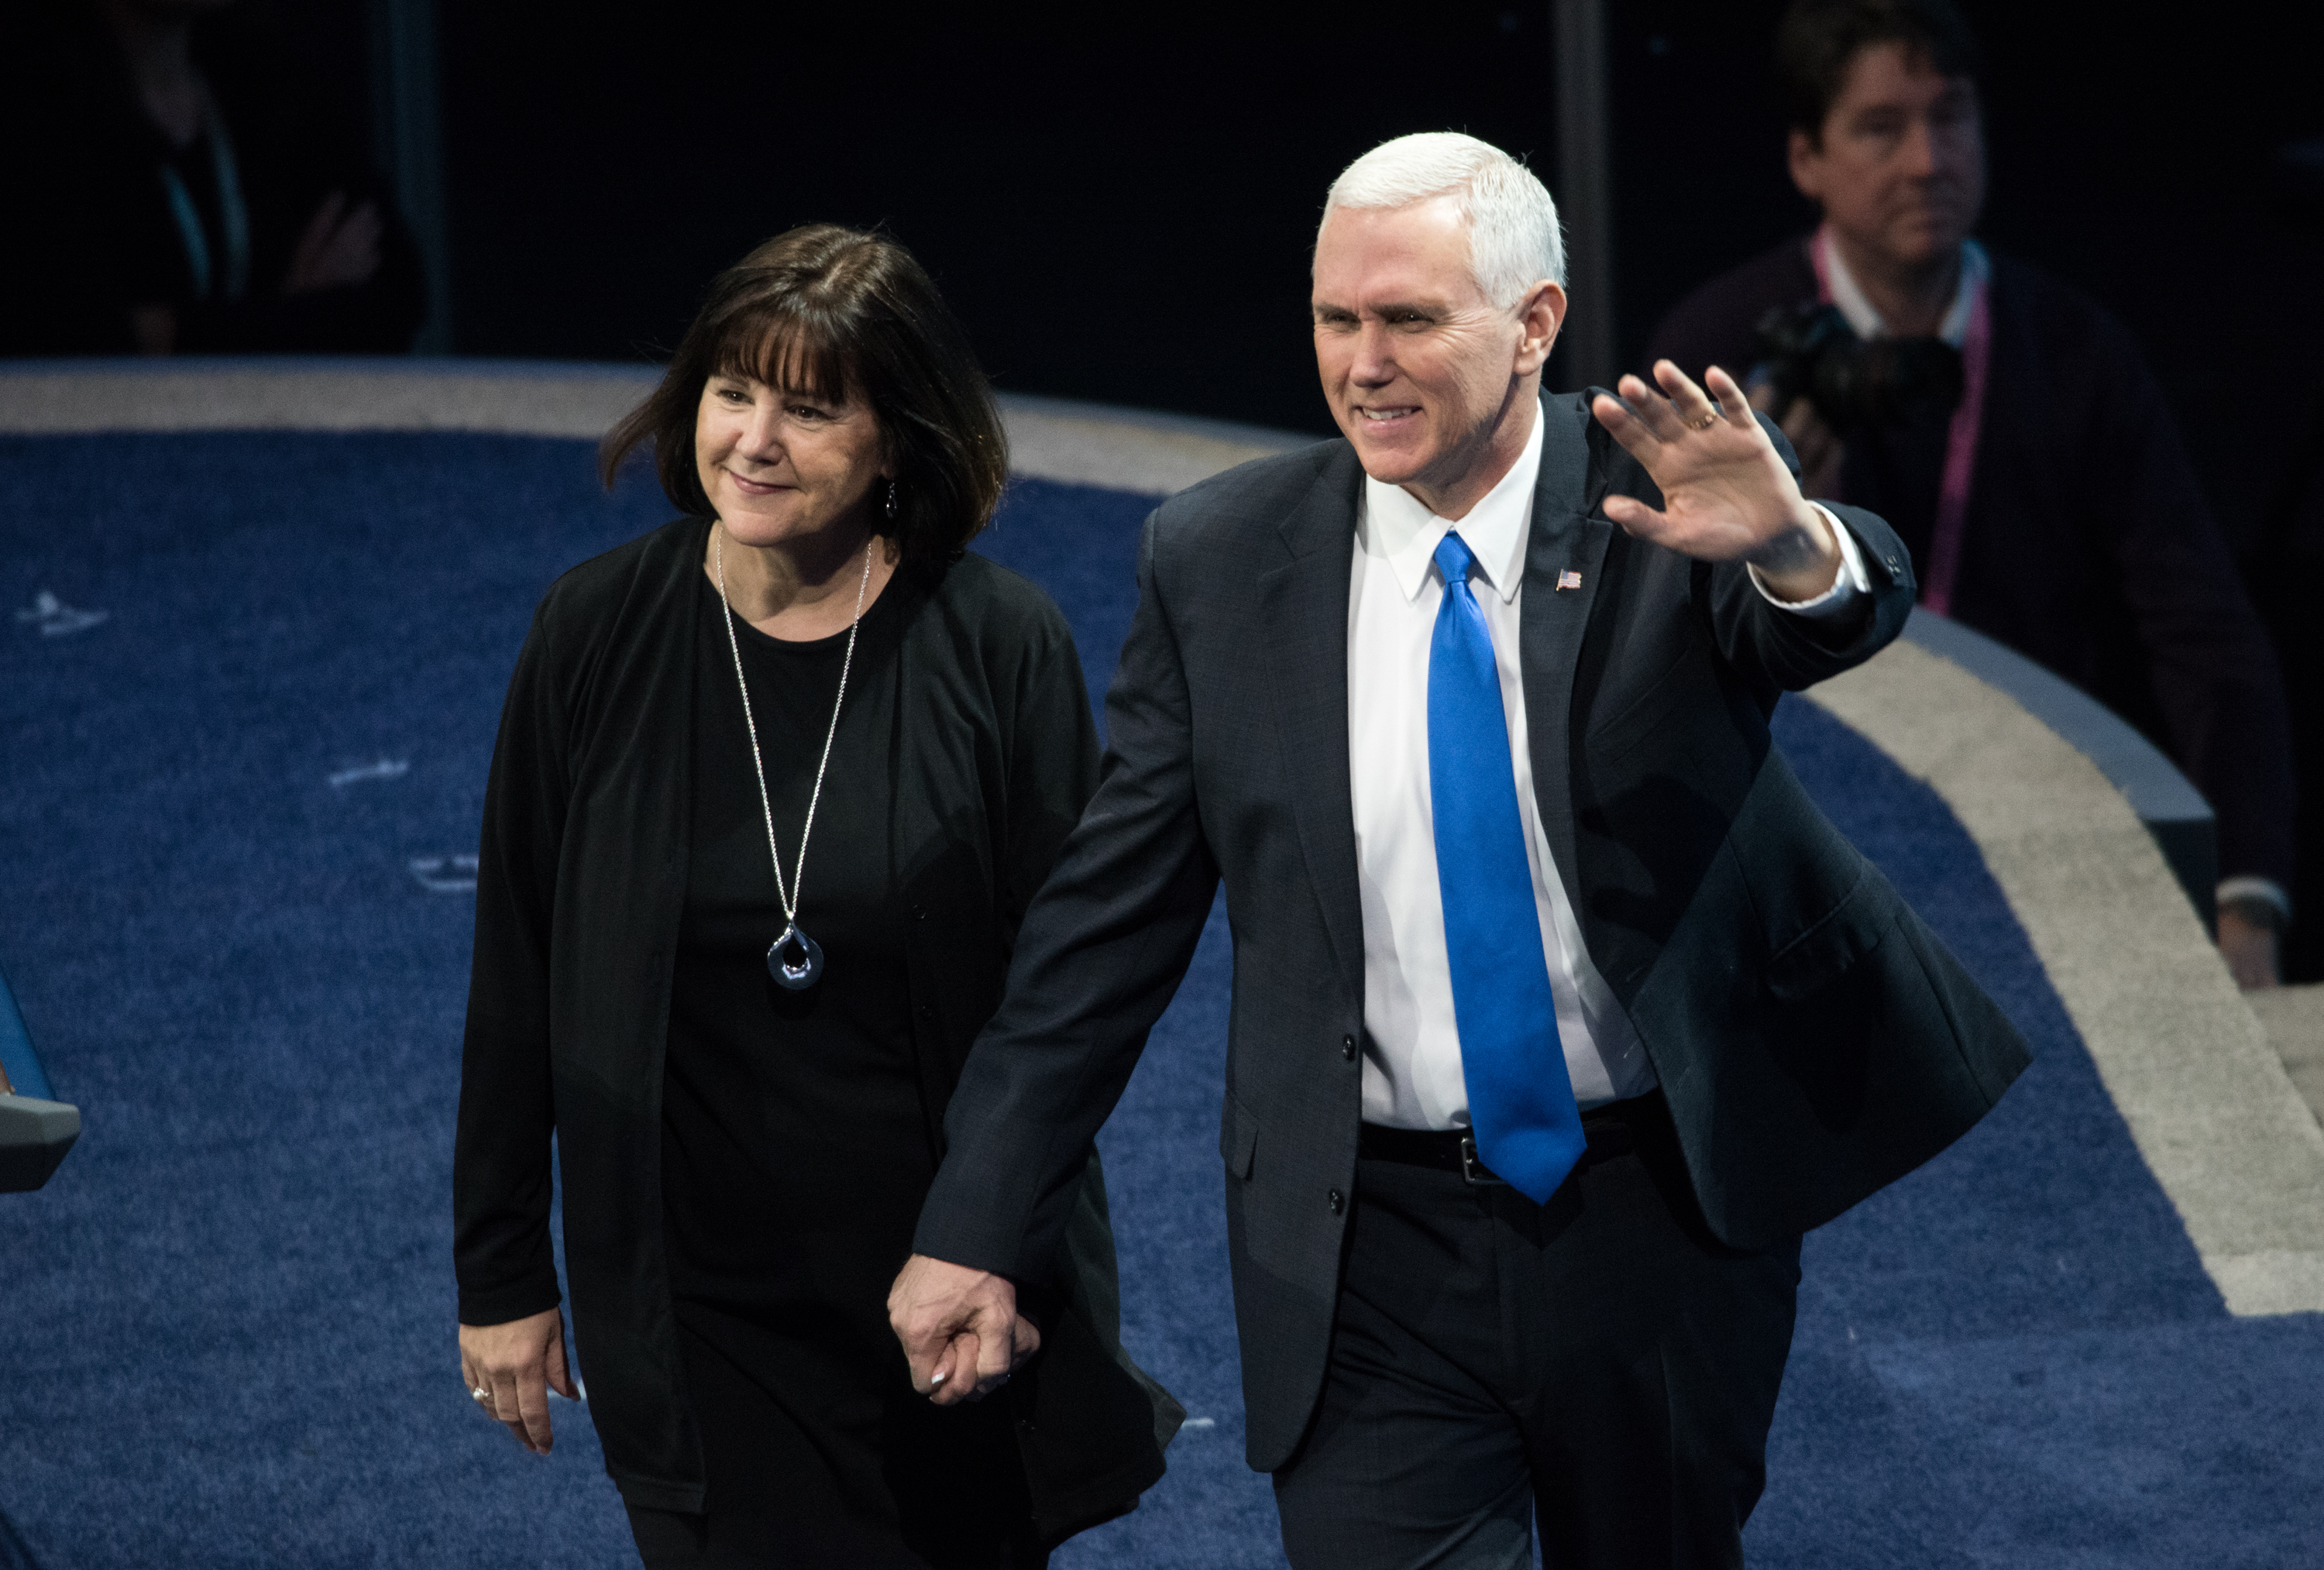 U.S. Vice President Mike Pence, right, and his wife Karen Pence are introduced at the the AIPAC 2017 Convention on March 26, 2017, in Washington, D.C. (Noam Galai—Getty Images)